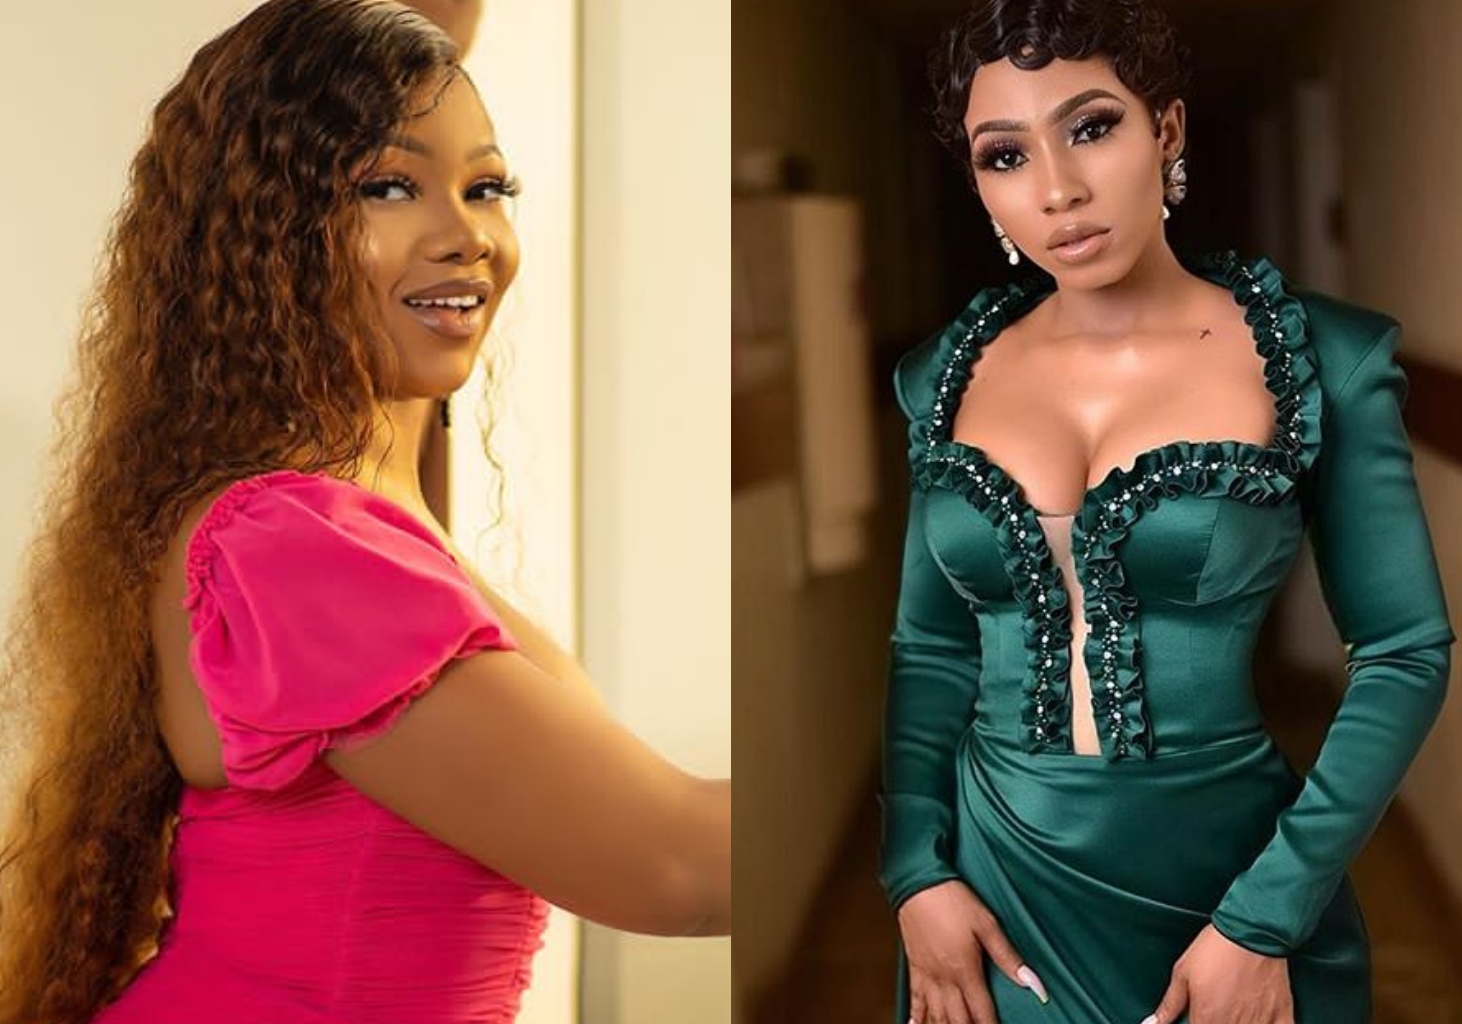 Tacha and Mercy's fans fight dirty on Twitter over endorsement deal